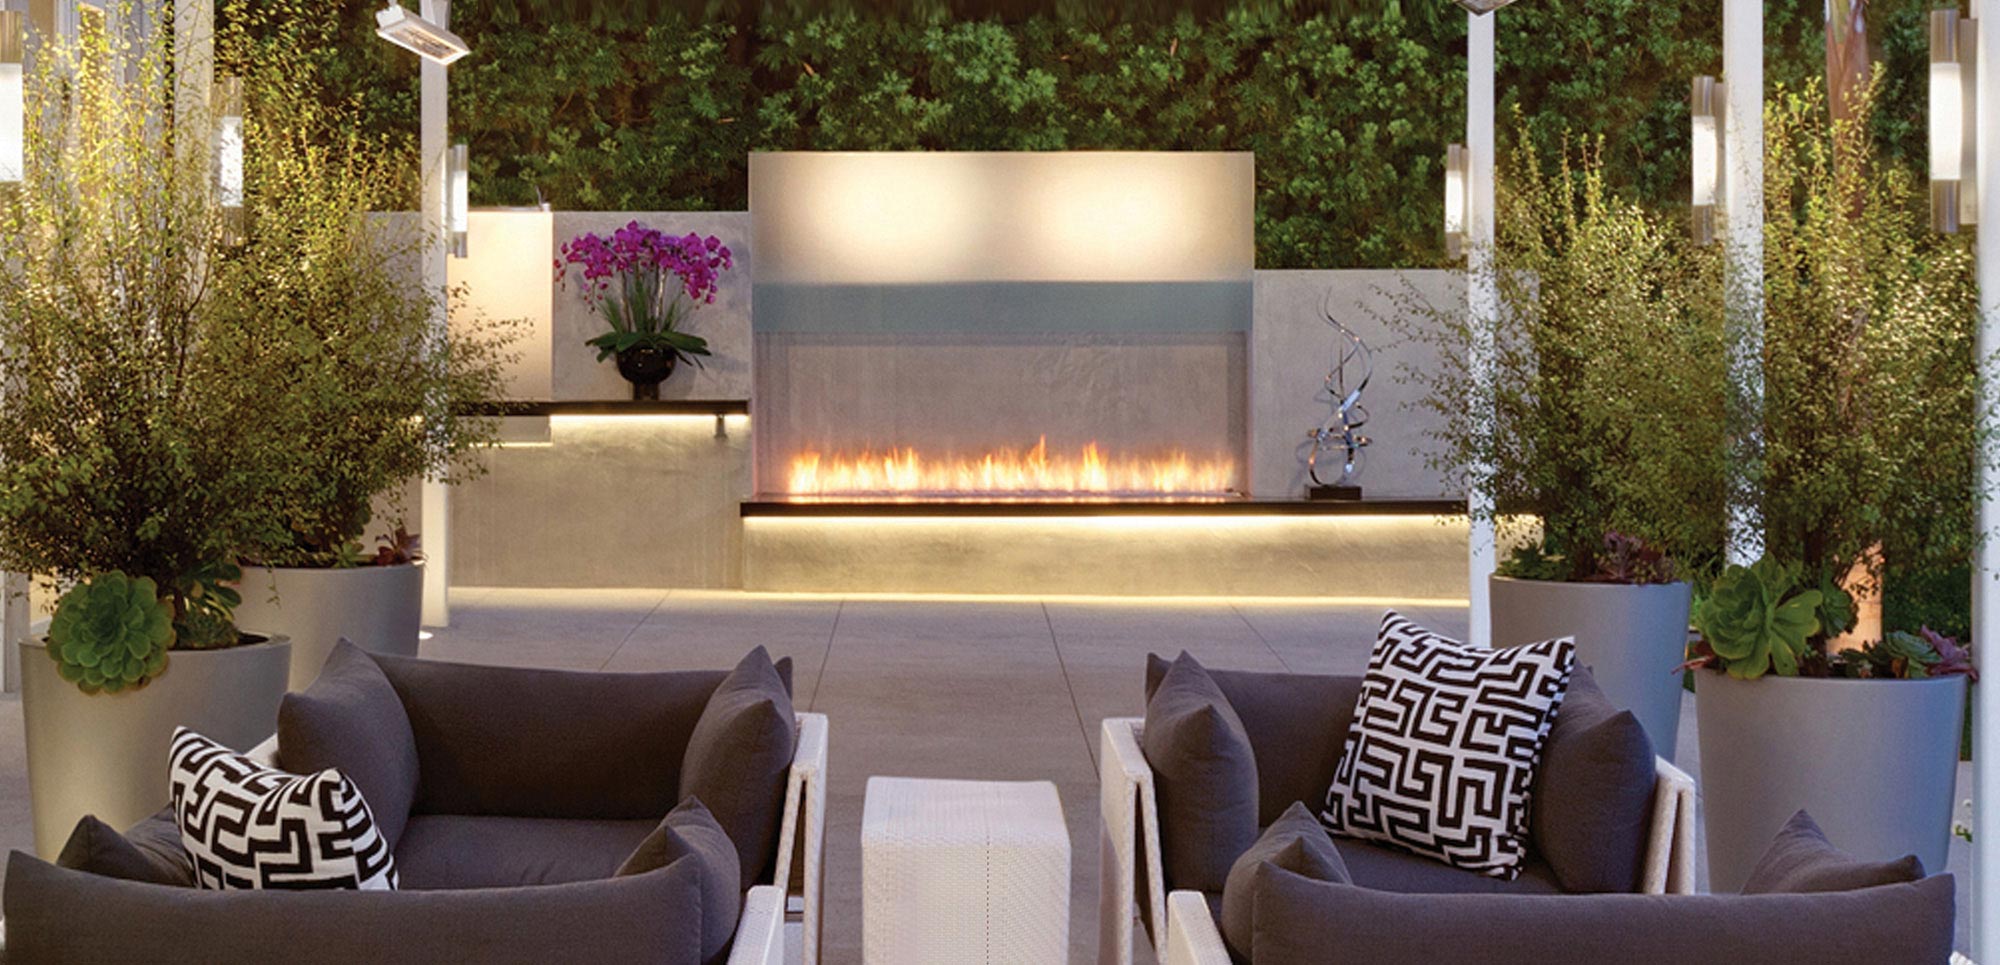 Fireplace and Patio Inspirational Spark Modern Fires